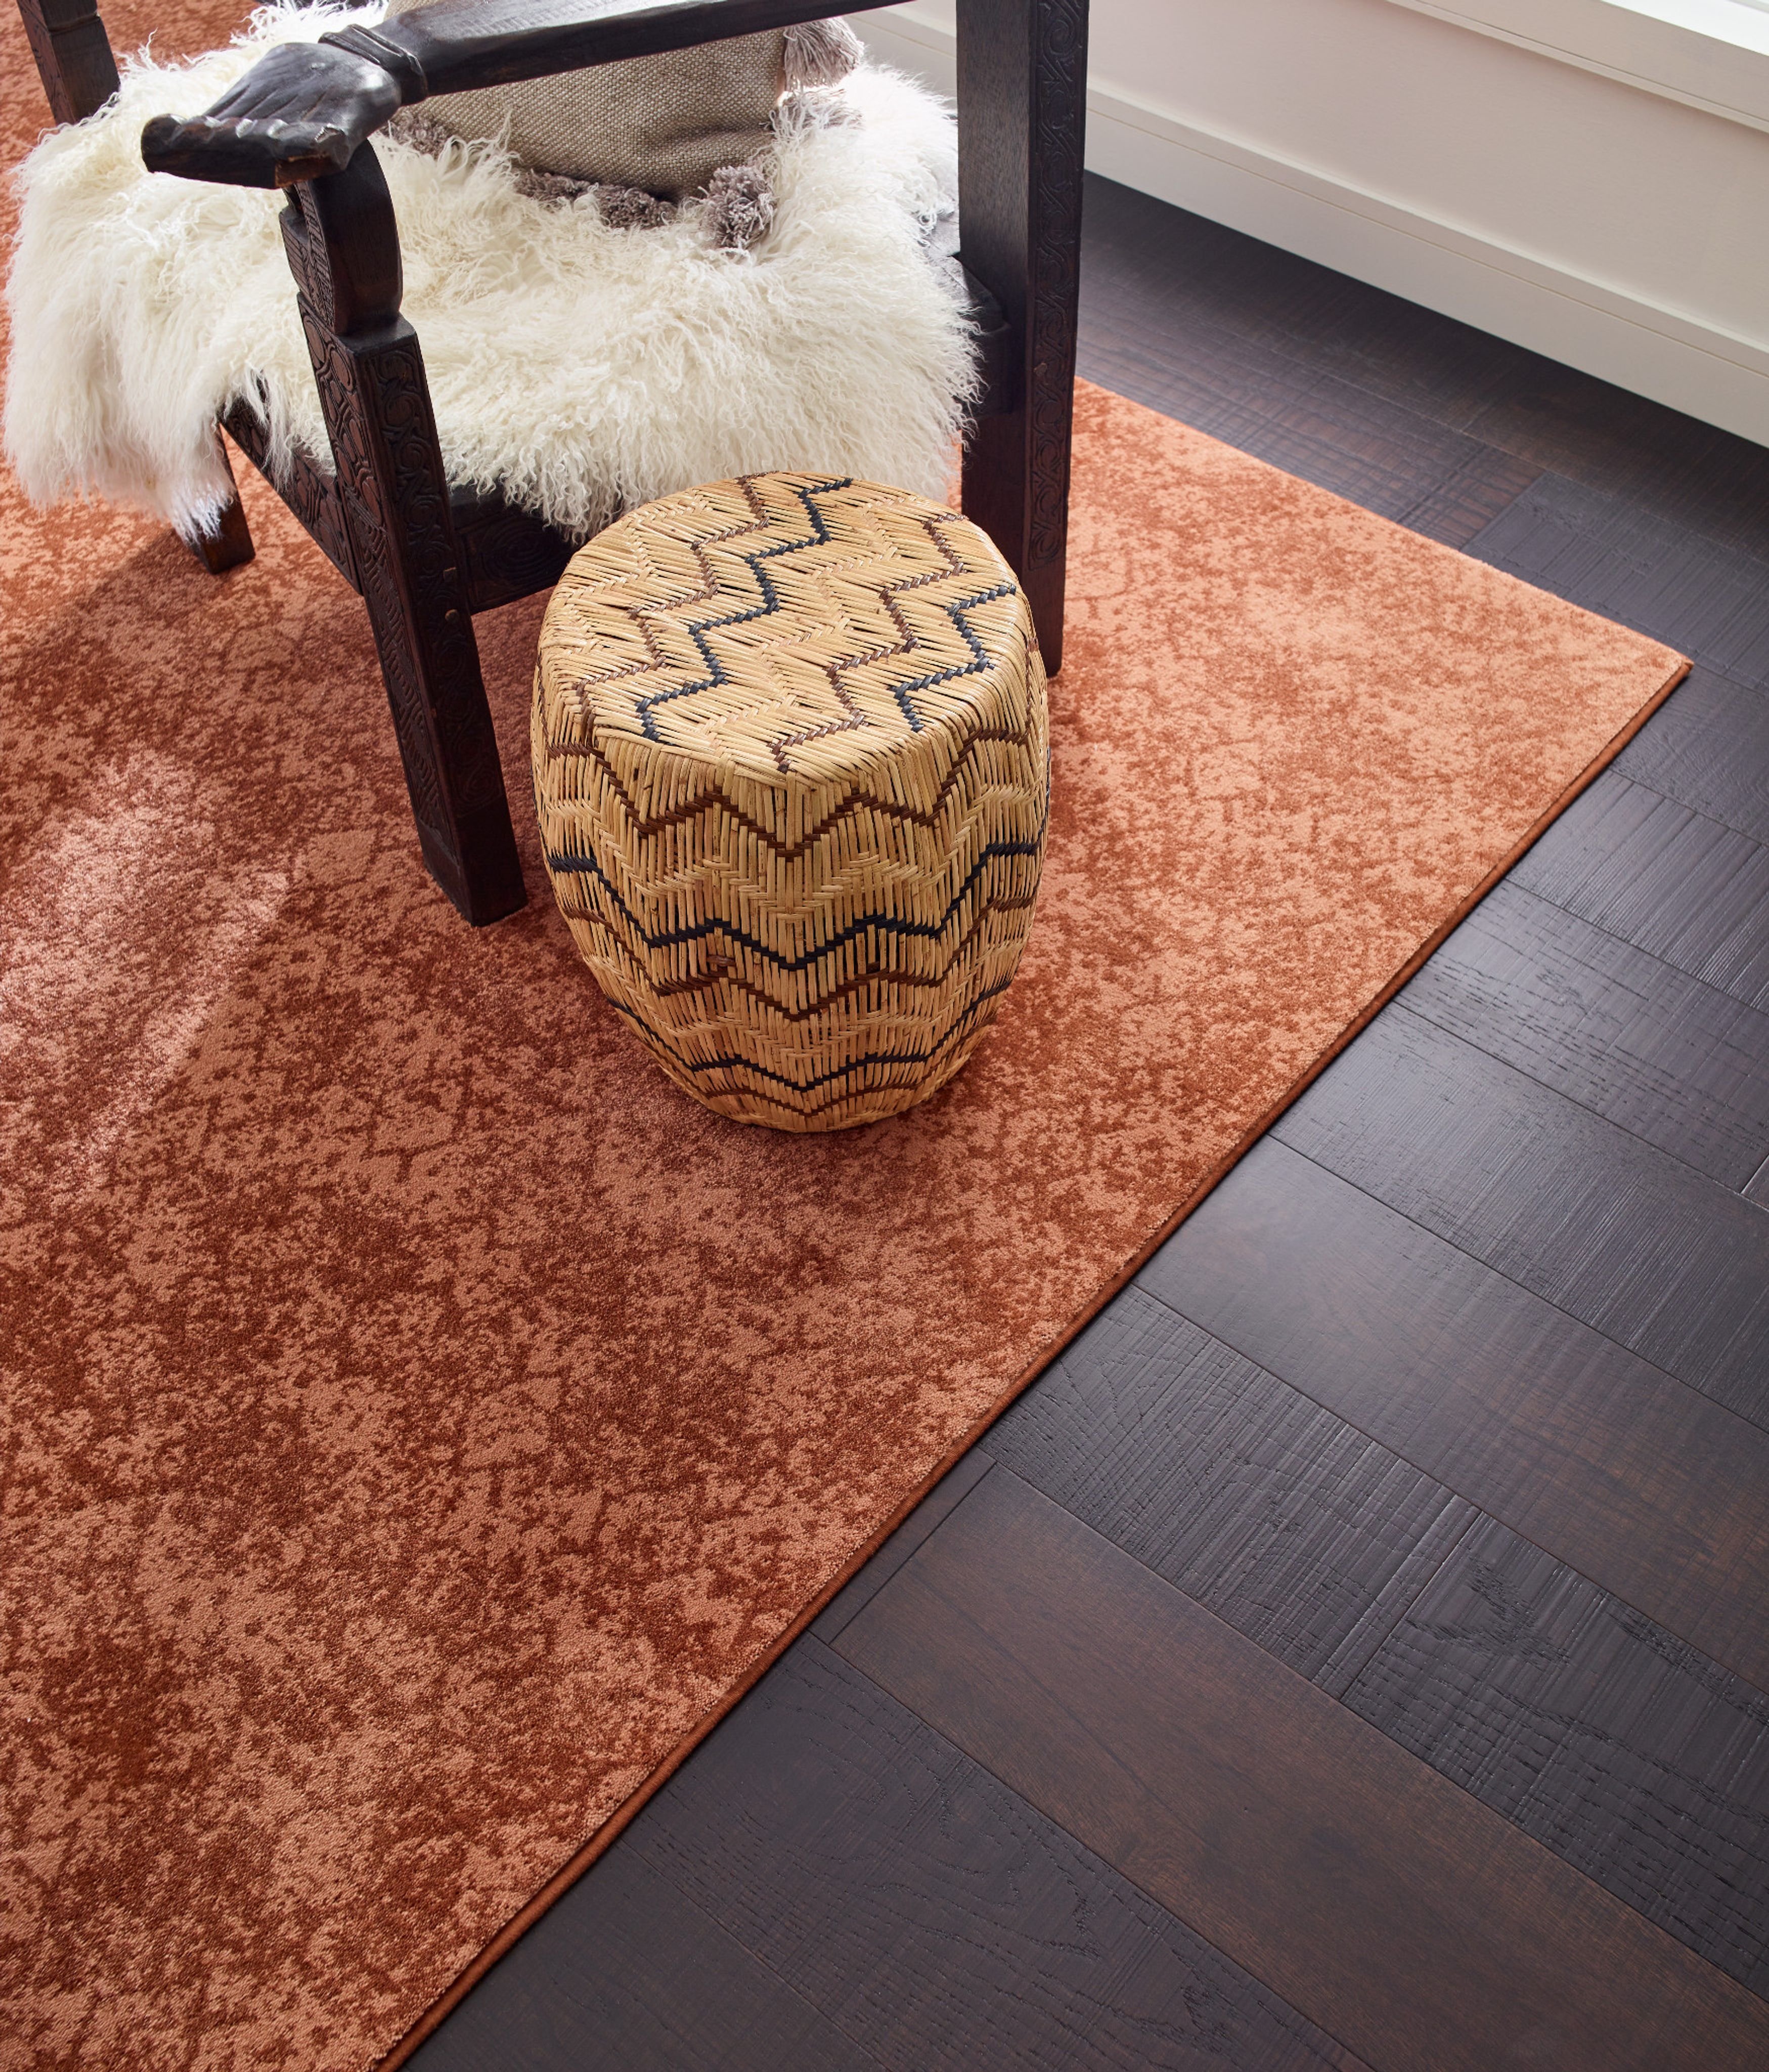 Room with dark hardwood flooring and an orange patterned rug - Carpet binding services from Korfhage Floor Covering in the Louisville, KY area